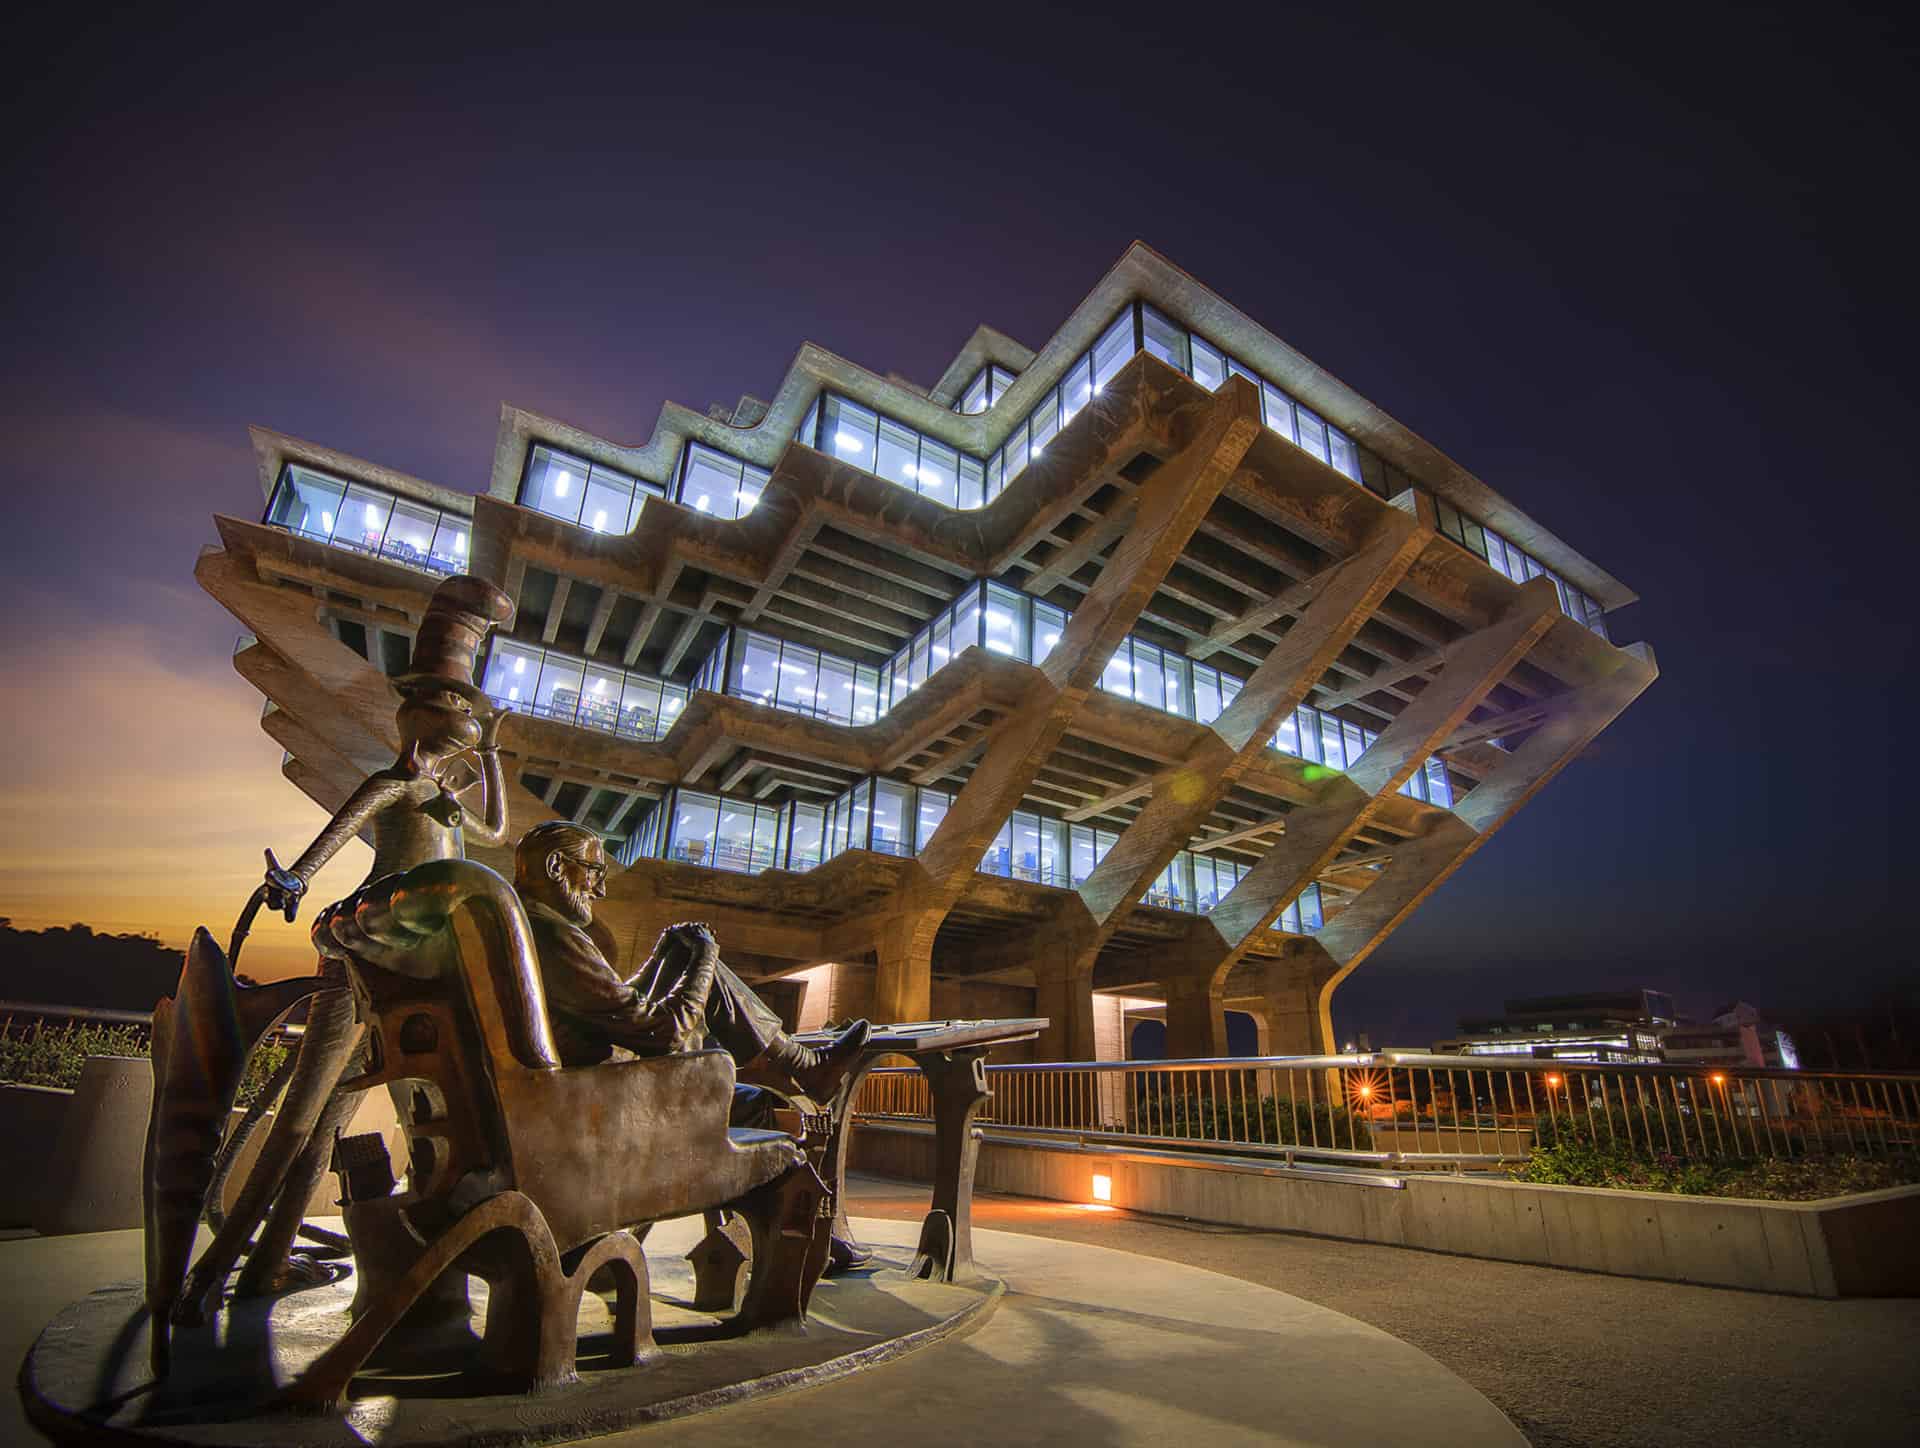 Image Credit: Geisel Library